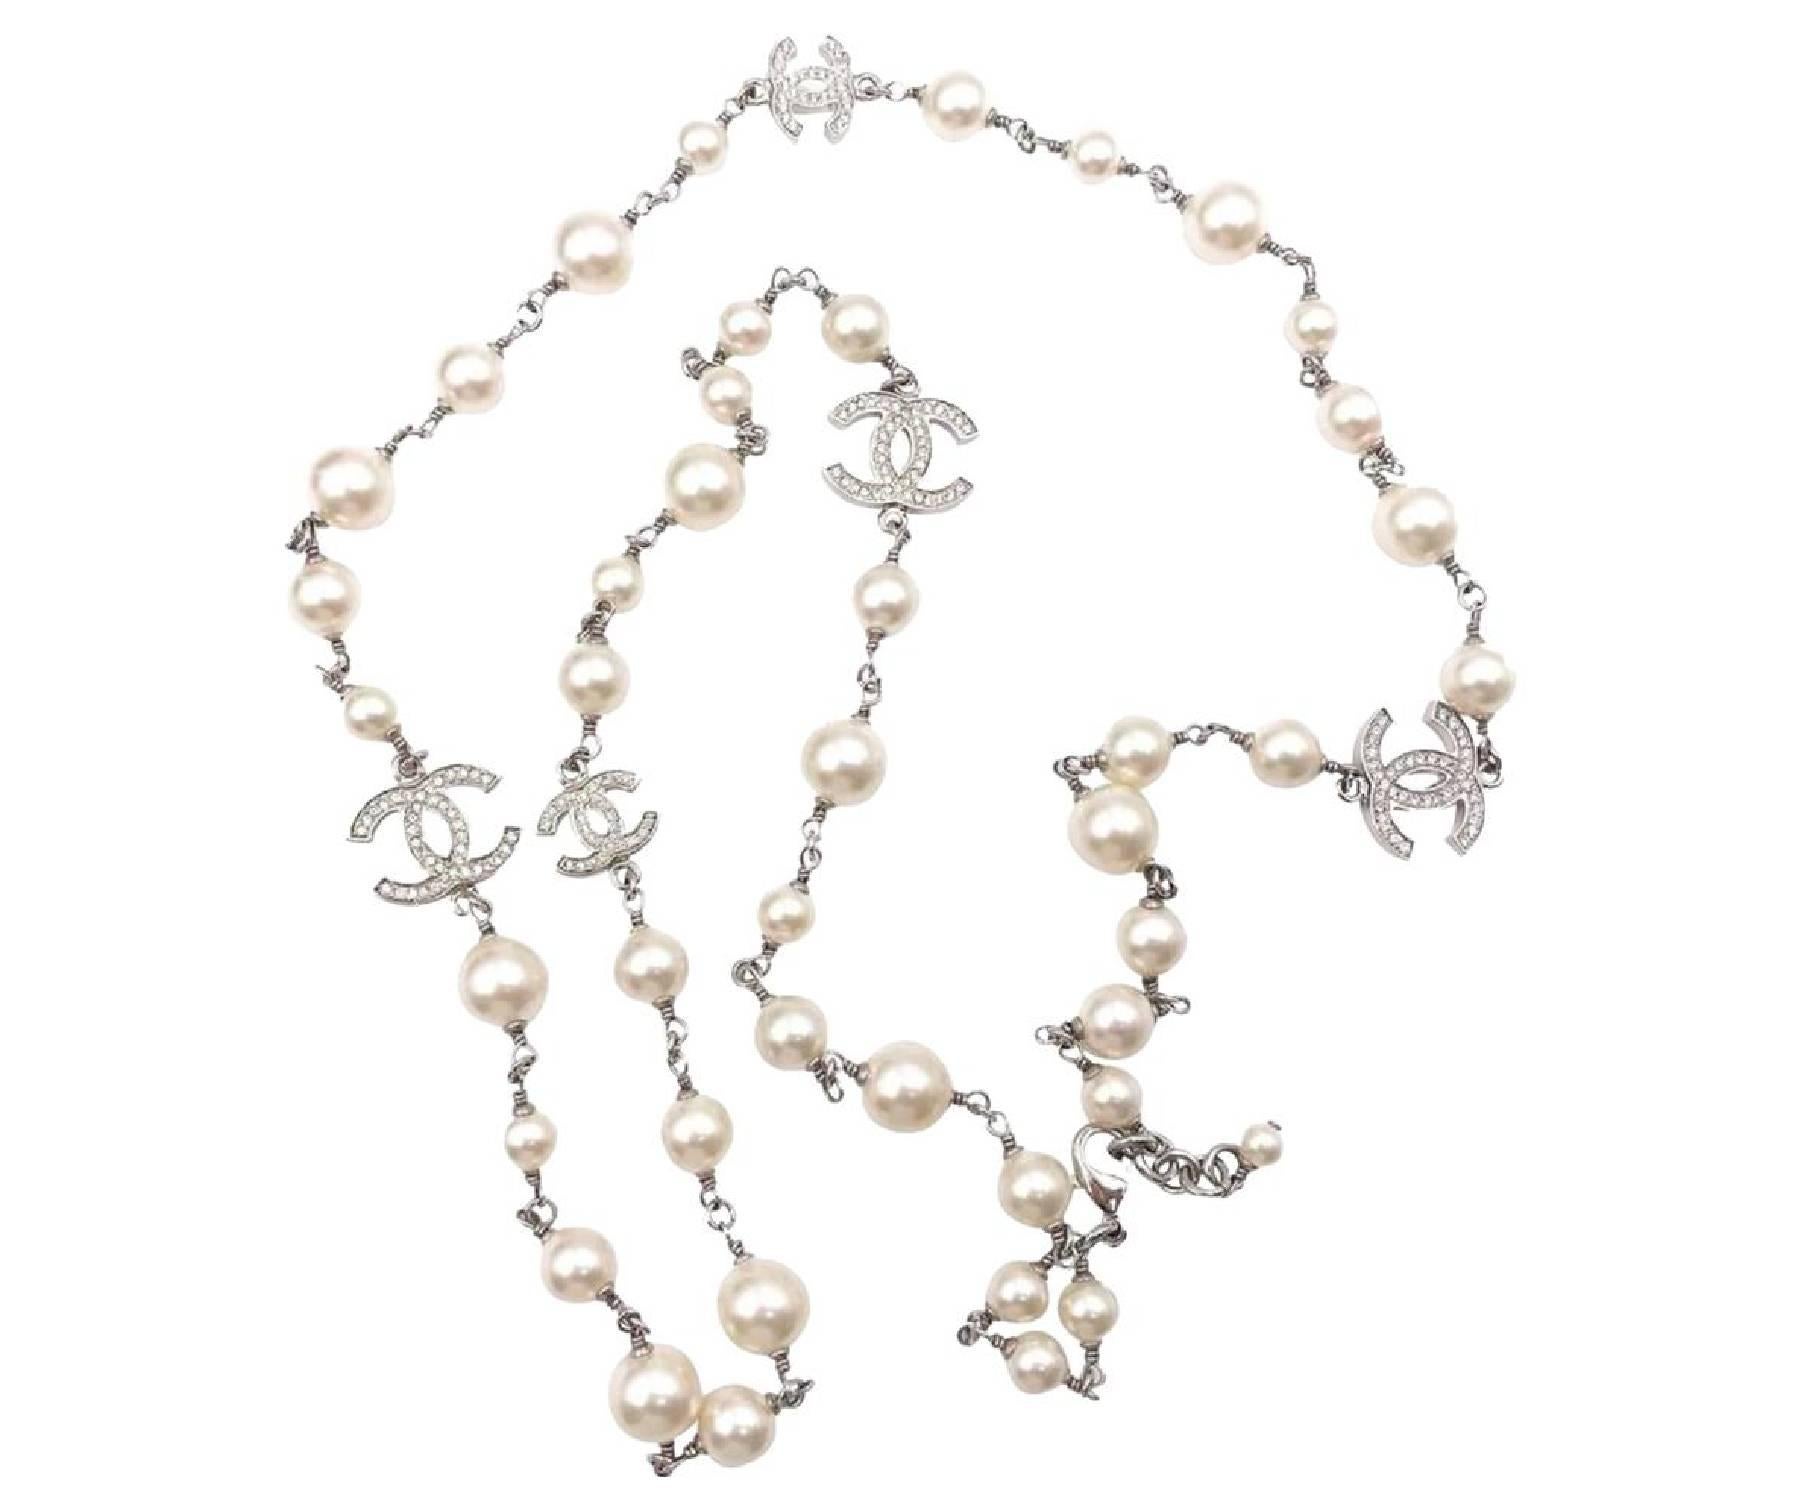 Chanel 5 Silver CC Crystal Faux Pearl Long Necklace

* Marked 10
* Made in Italy
* Comes with the original box

-It is approximately 42